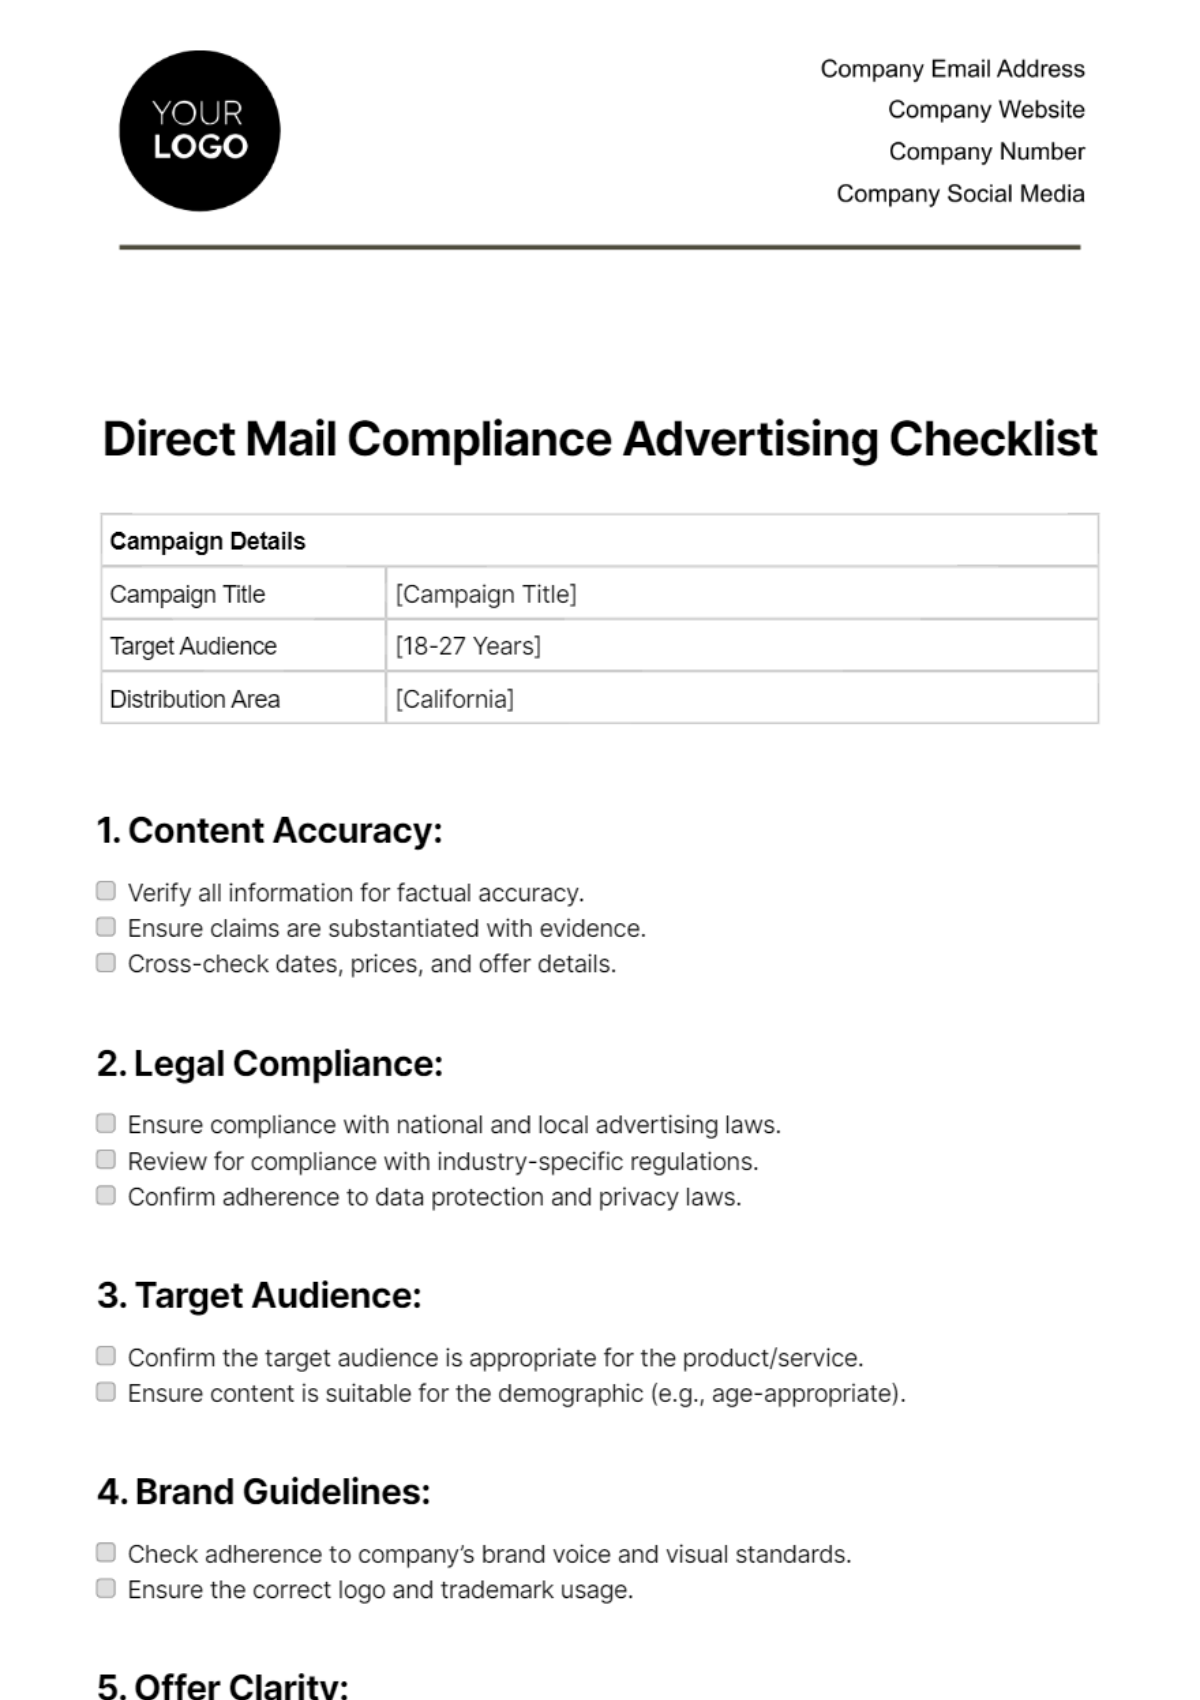 Free Direct Mail Compliance Advertising Checklist Template